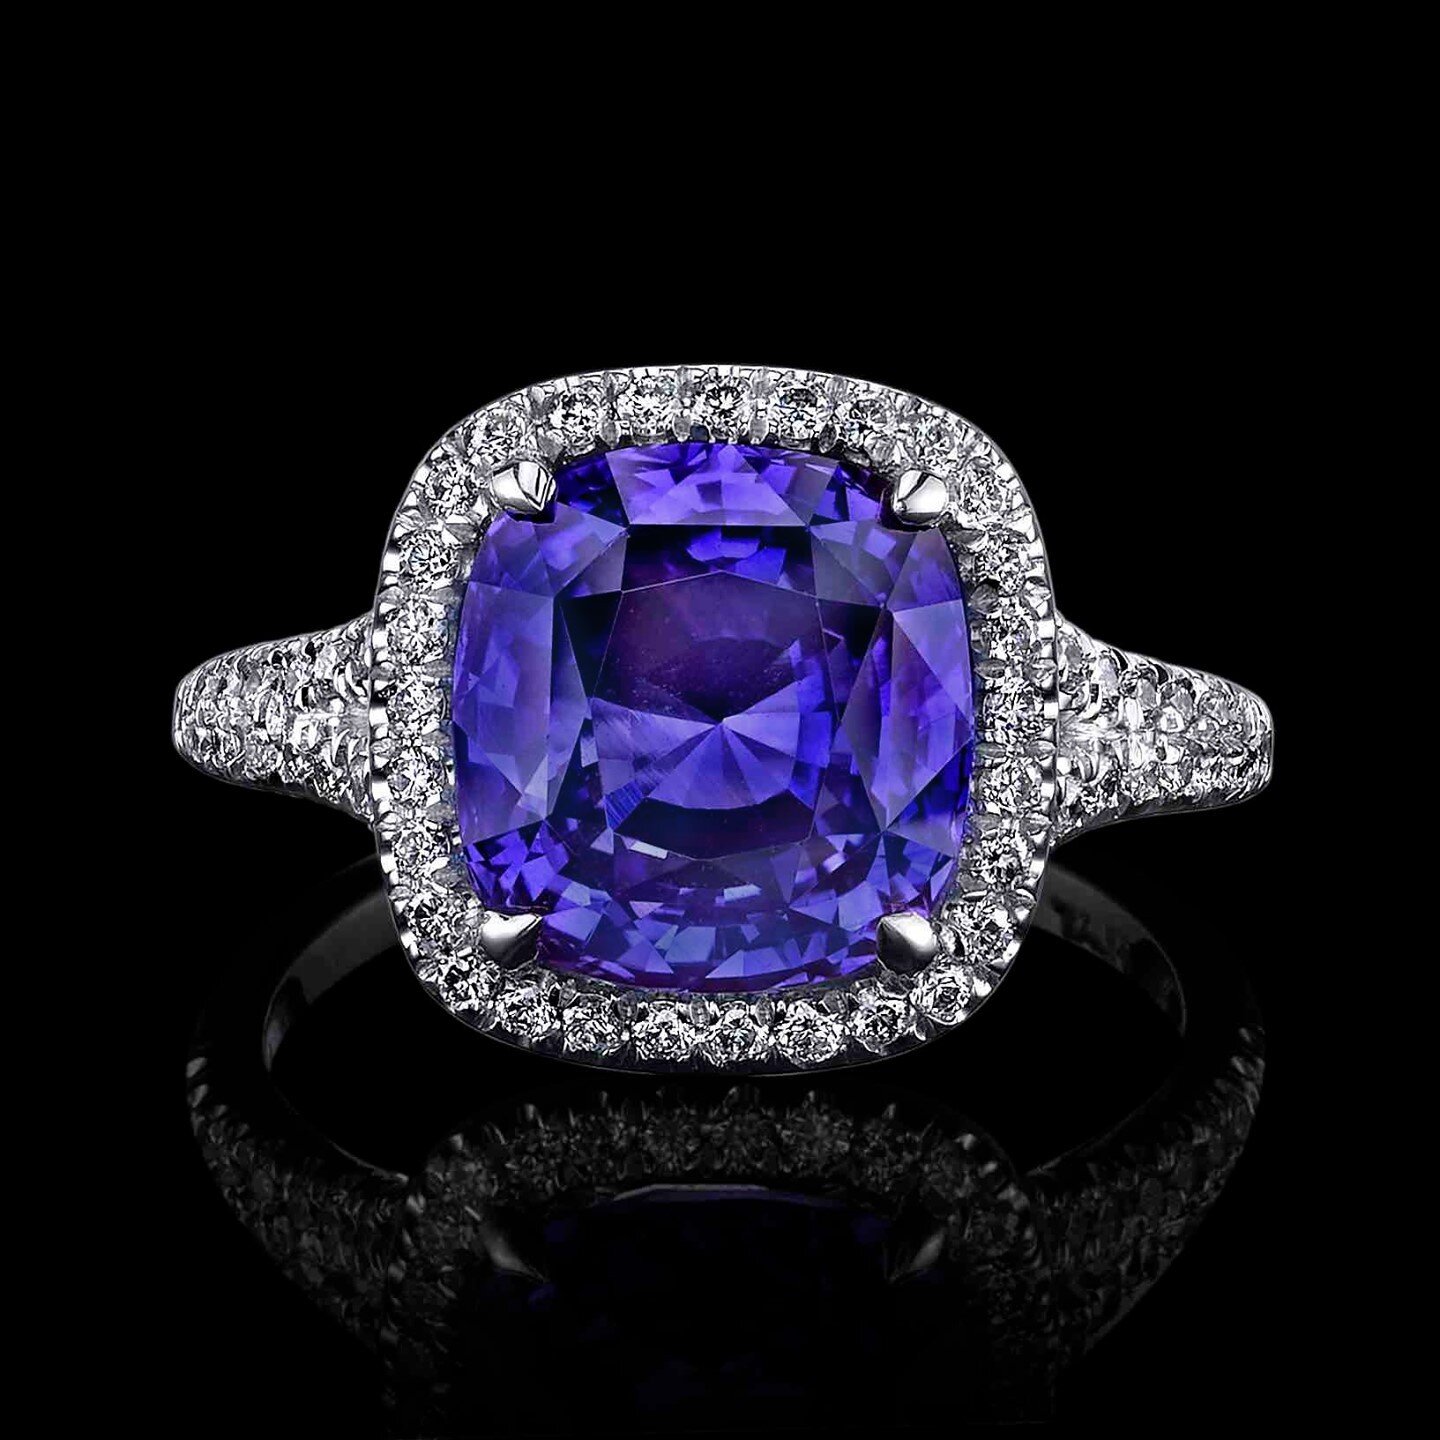 #colorgems are so beautiful! They come in all kind of colors and can make me smile when i see them. This one is a 6.56ct violetish, Blue #Sapphire, set in platinum and surrounded by diamonds. What a great gift for the summer! 

#raimanrocks #gems #co